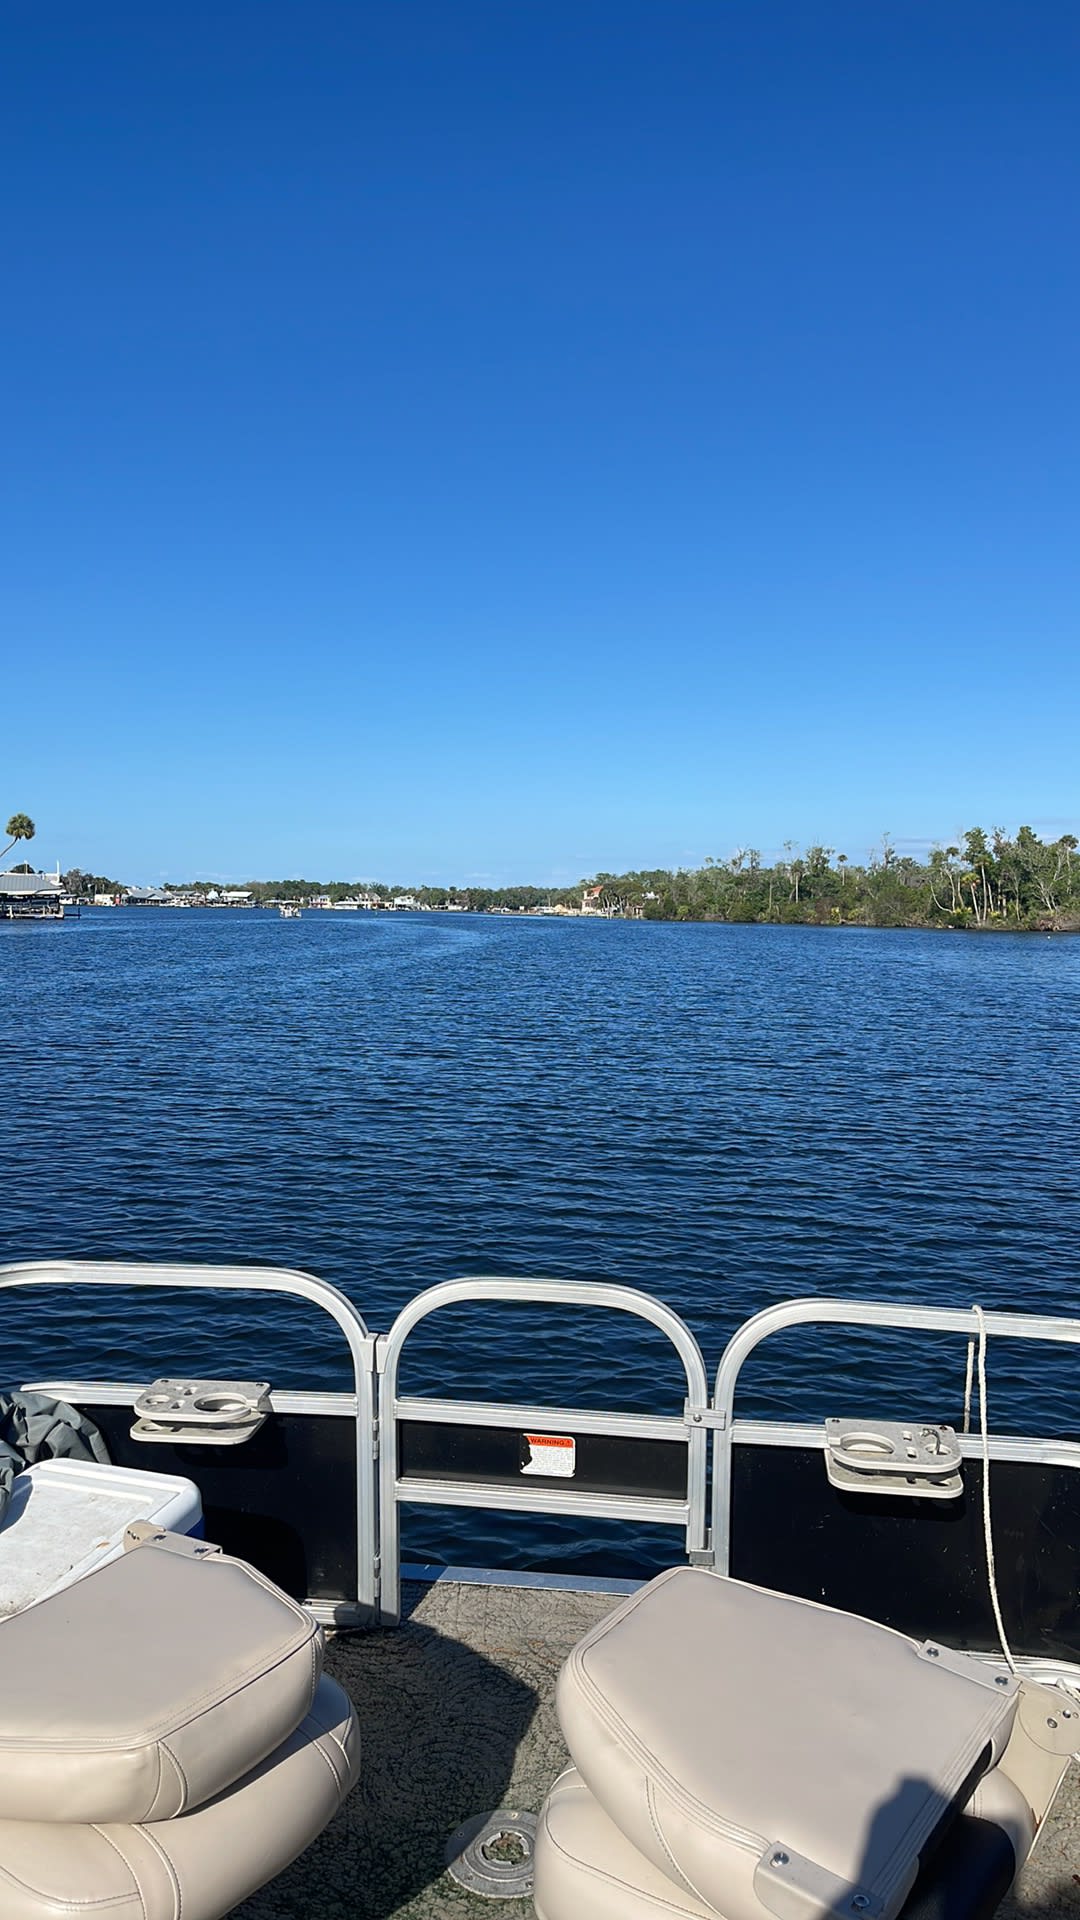 Homosassa river, from  springs to the Gulf of Mexico! Fishing, kayaking, swimming, fishing, boating  available at so many in this area or bring your own.